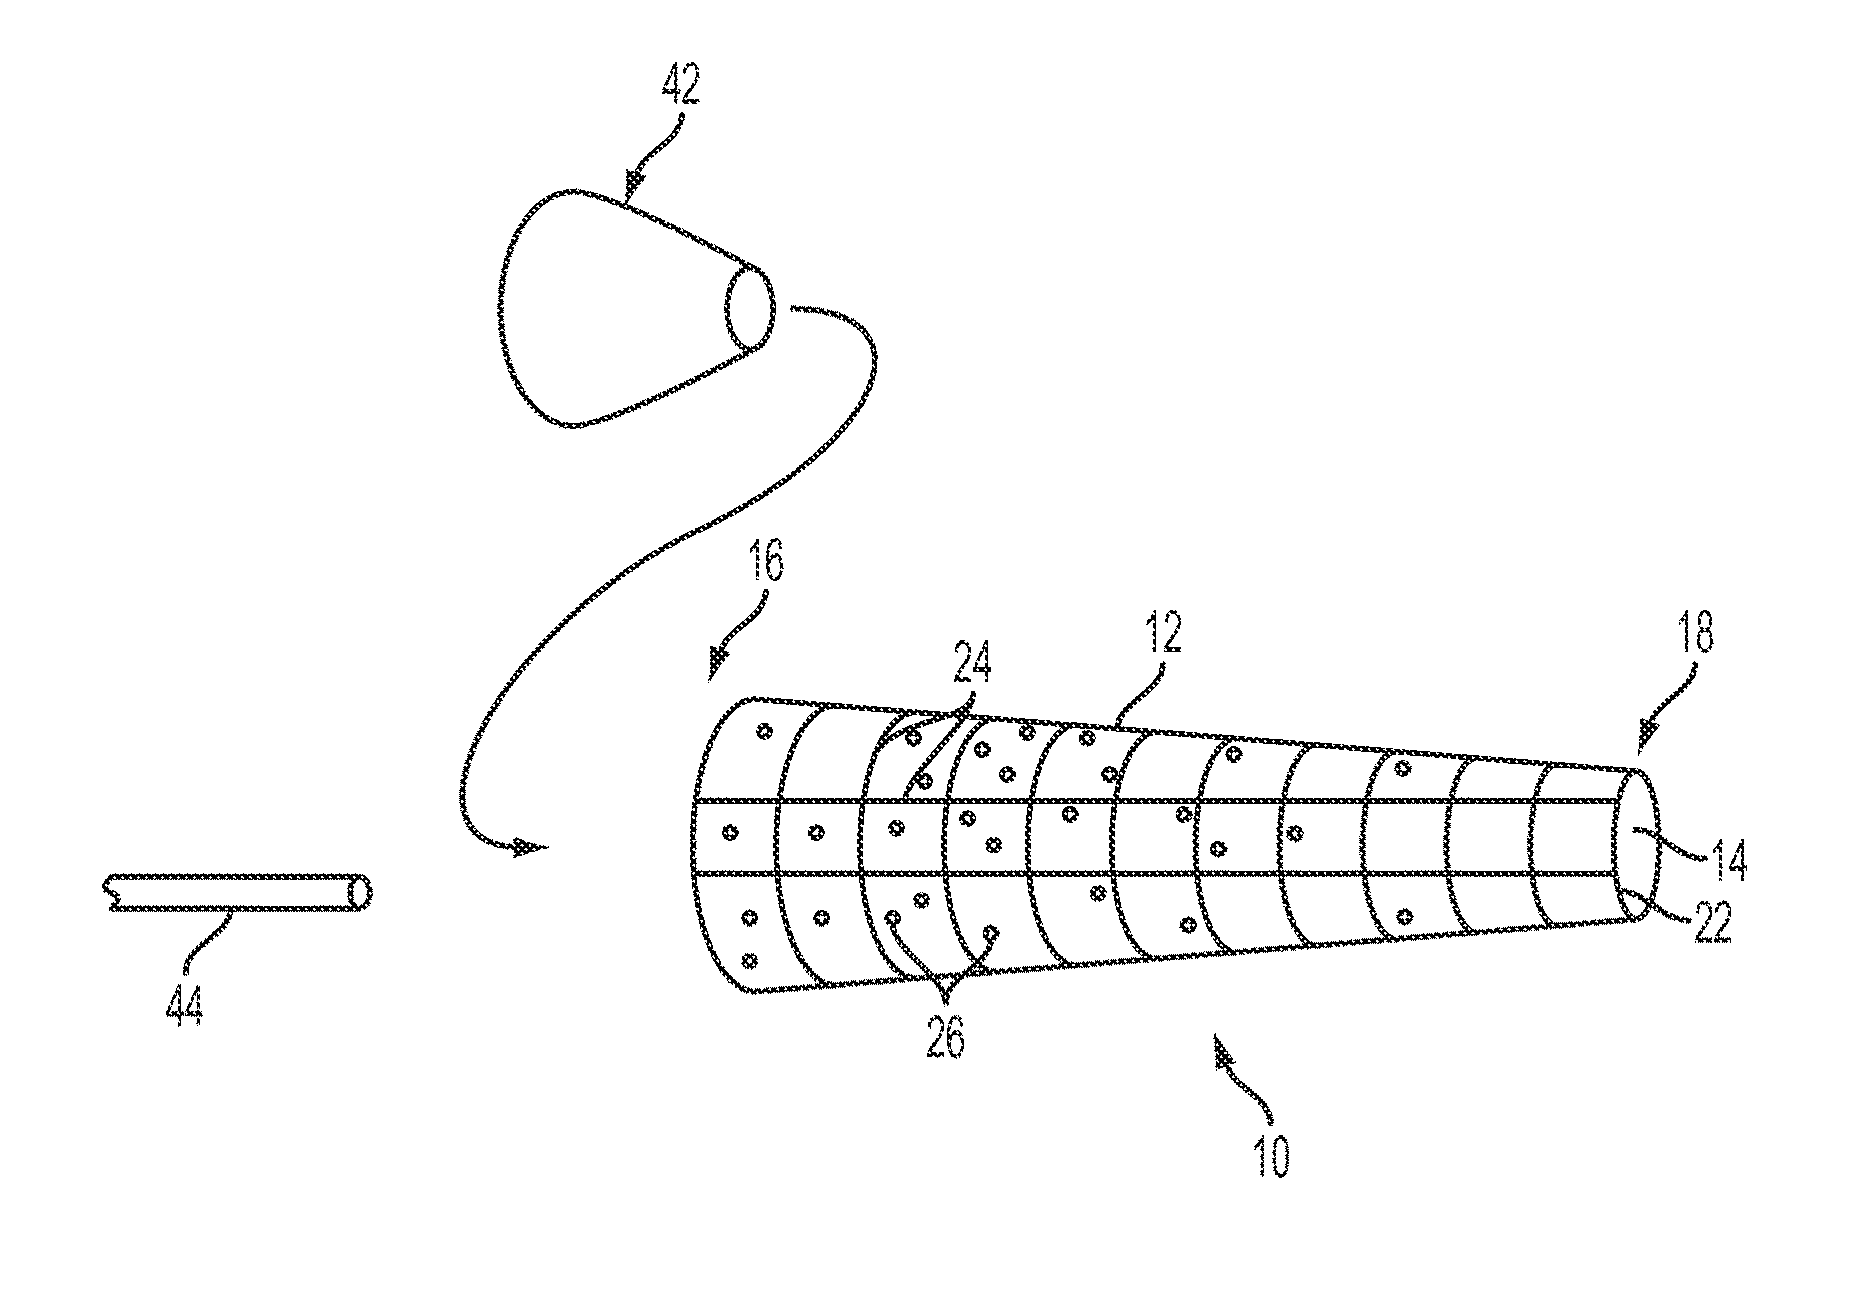 Surgical screw hole liner devices and related methods